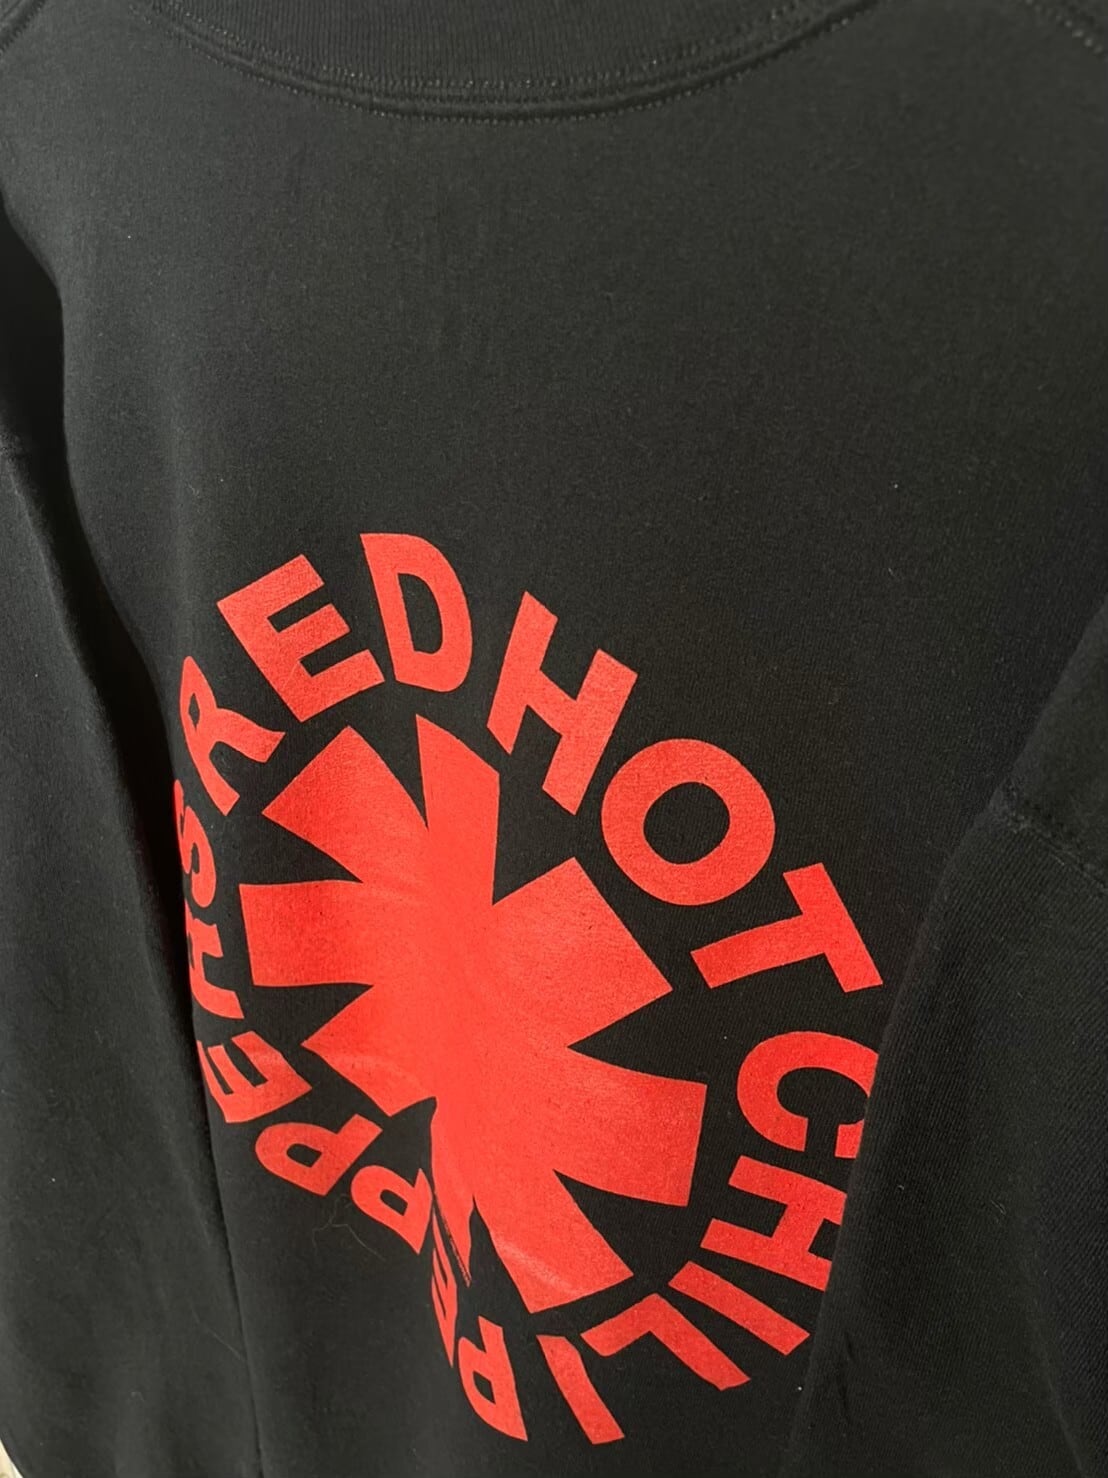 80-90's Red Hot Chili Peppers レッドホットチリペッパーズ プリント スウェットクルーネックトレーナー ホワイト USA製 Size L